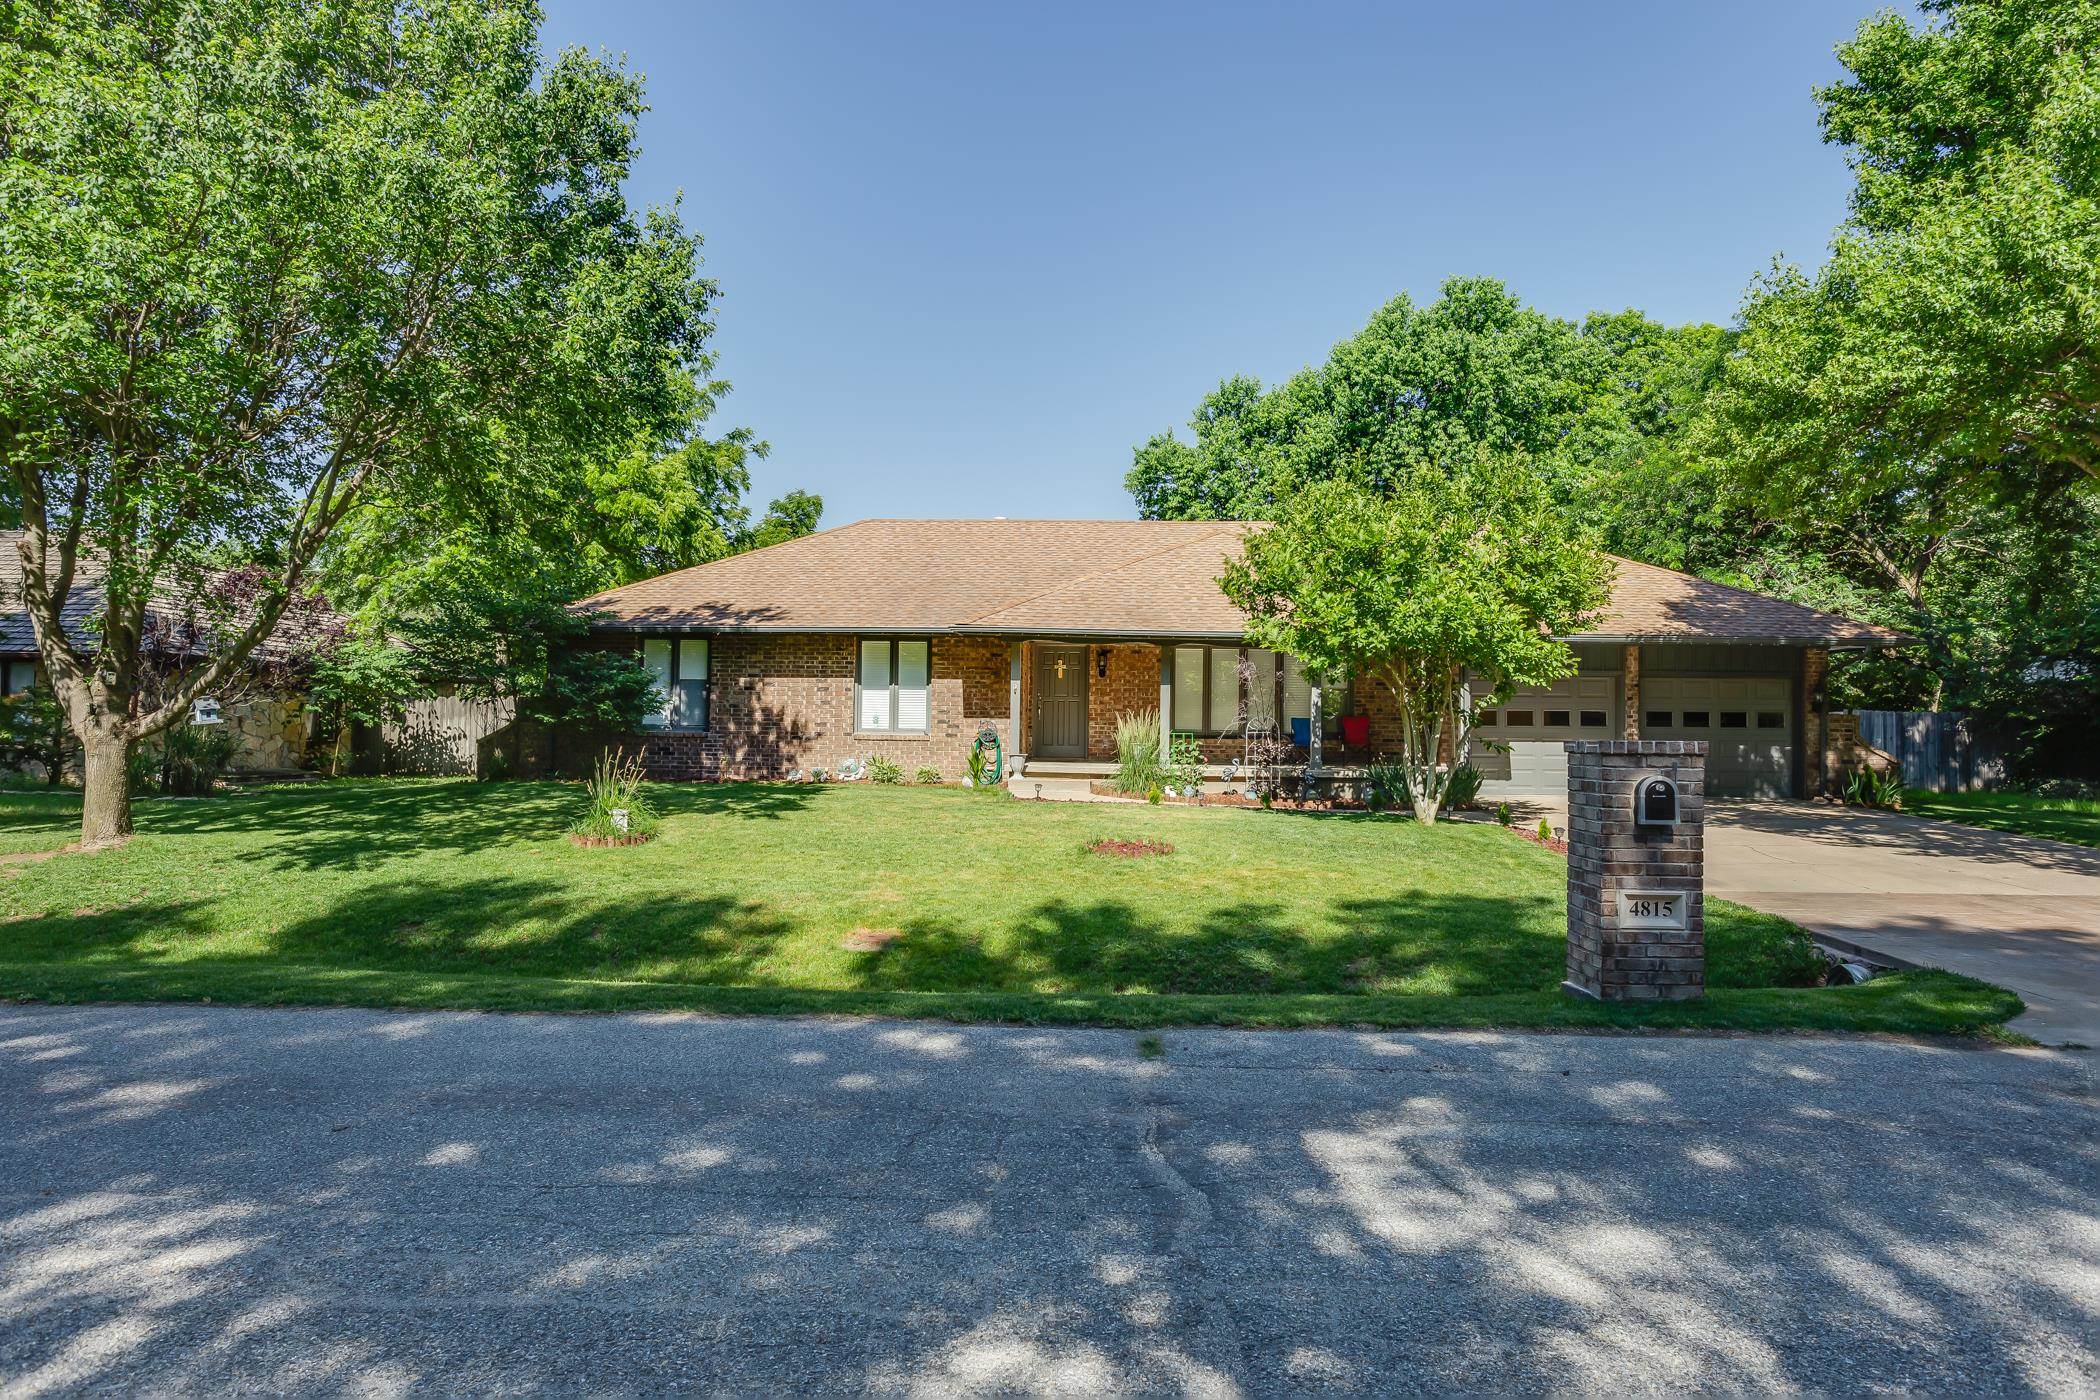 Beautiful sprawling brick ranch in a quiet neighborhood north of Wichita. The attention to detail in